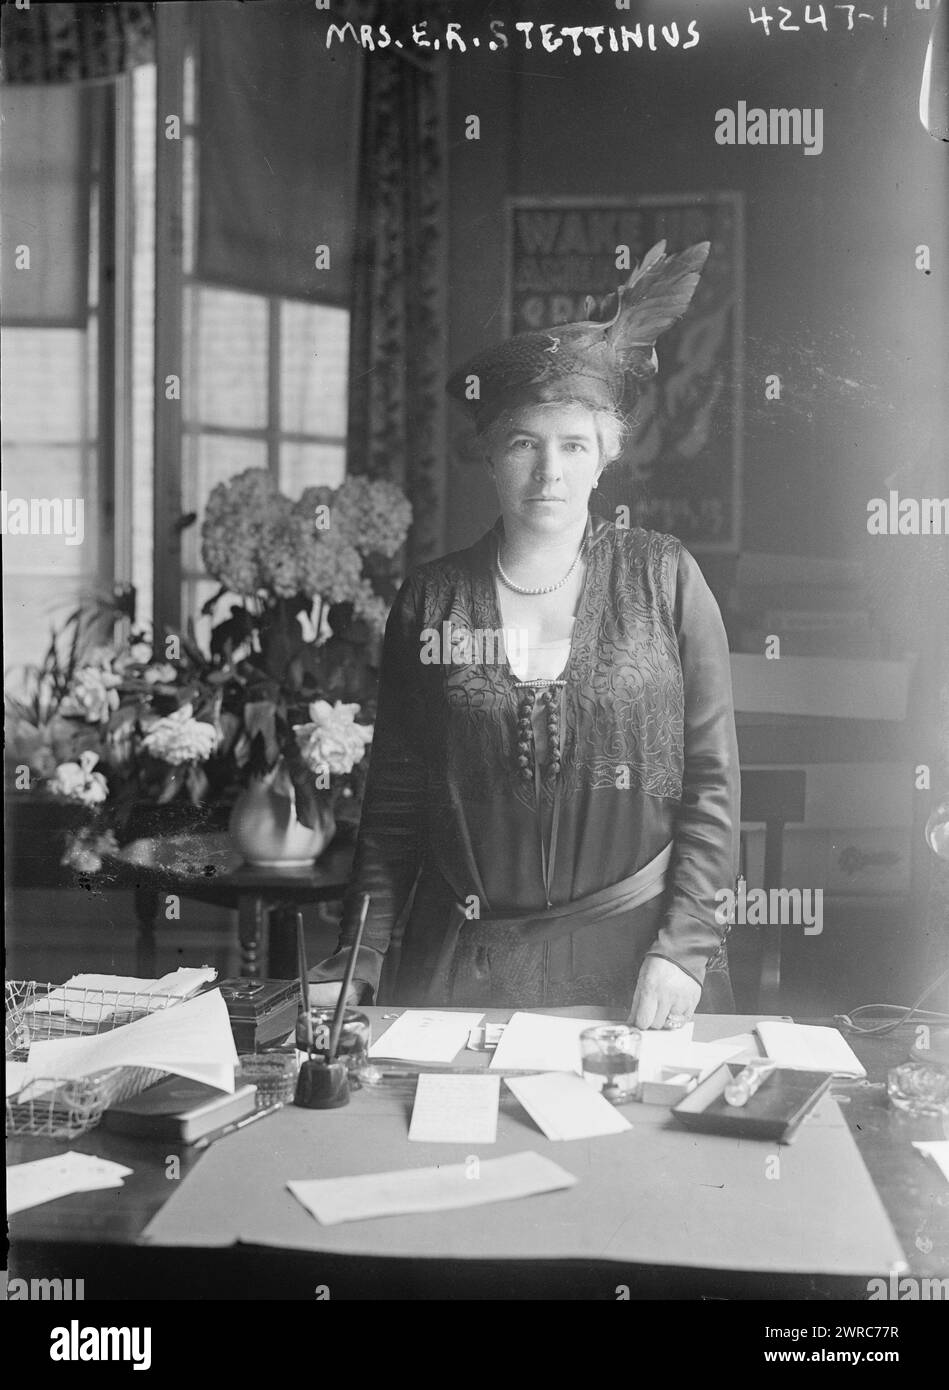 Mrs. E.R. Stettinius, Photograph shows Mrs. Edward Riley Stettinius, (formerly Judith Carrington) head of the Economy League of the Junior Colonial Dames of America, who headed a drive to collect waste paper for sale to benefit the Red Cross during World War I., 1917 June 19, World War, 1914-1918, Glass negatives, 1 negative: glass Stock Photo